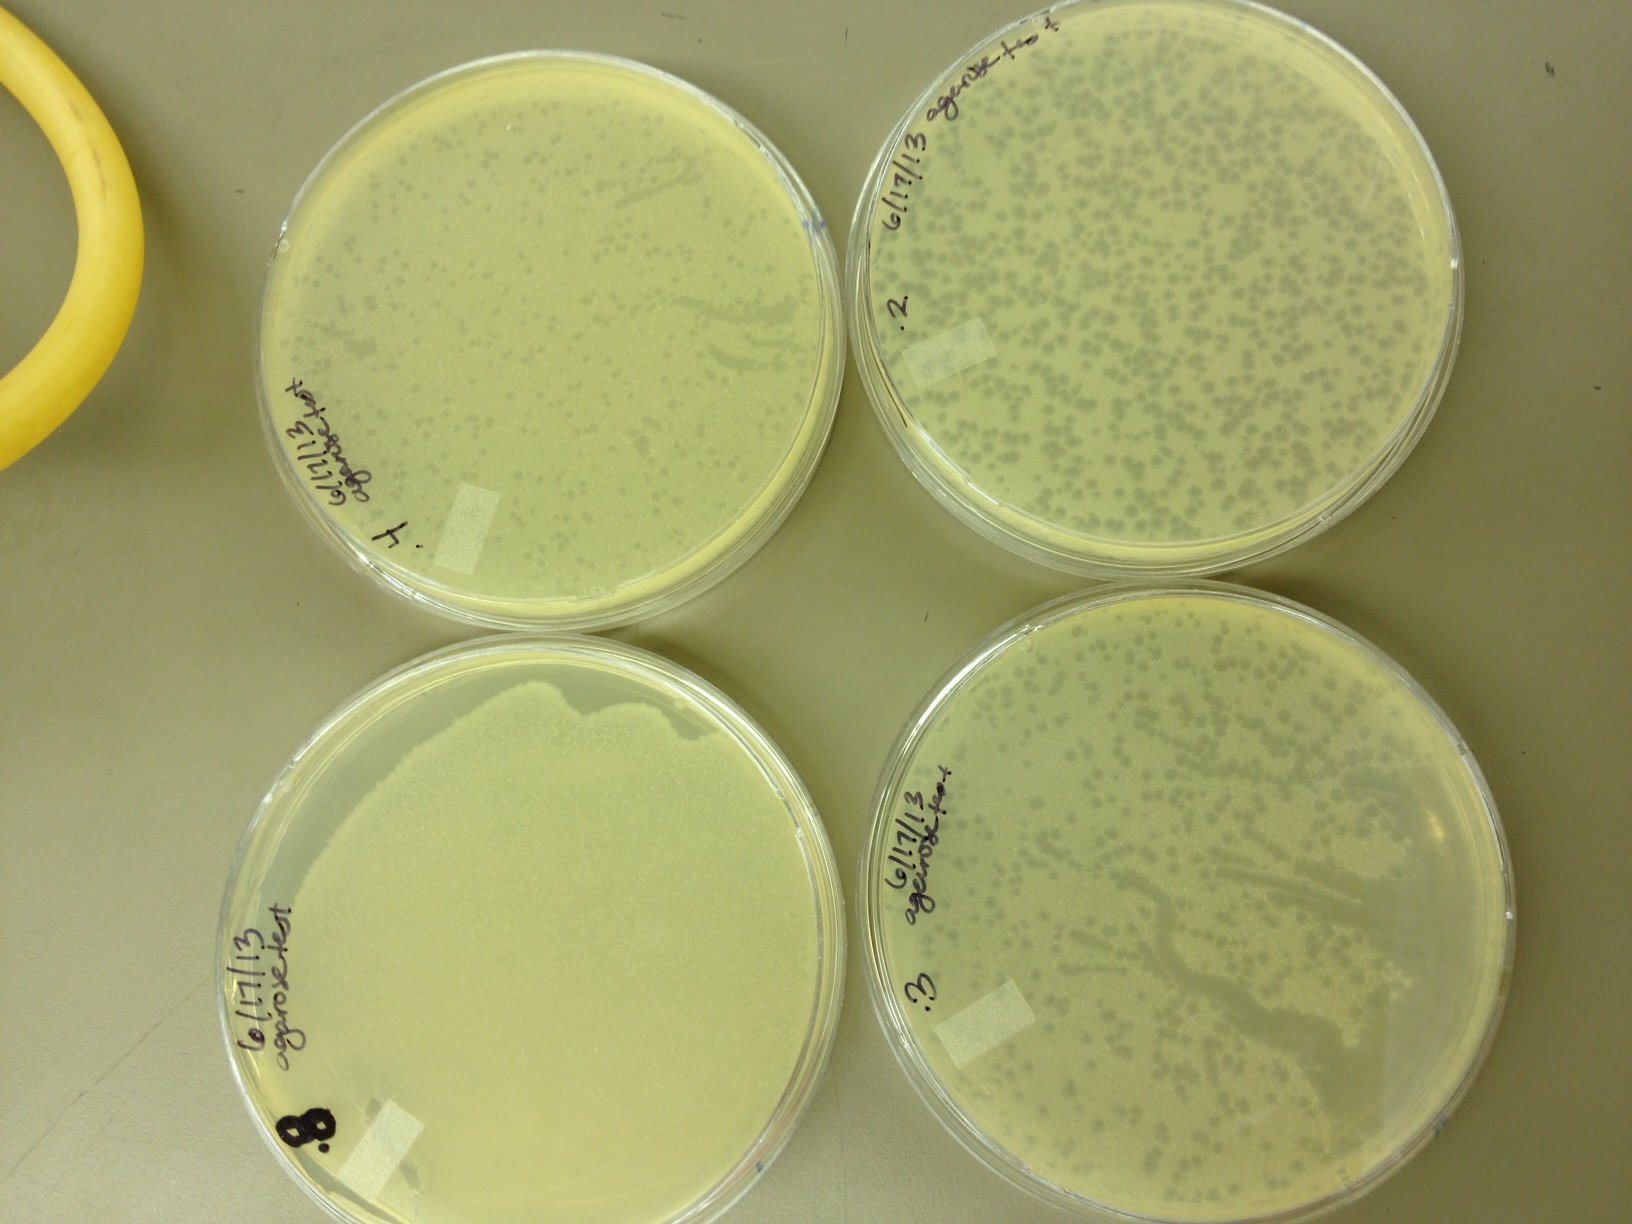 agarose concentrations from .8% to .2% plaque sizes increase as concentration of agarose decreases